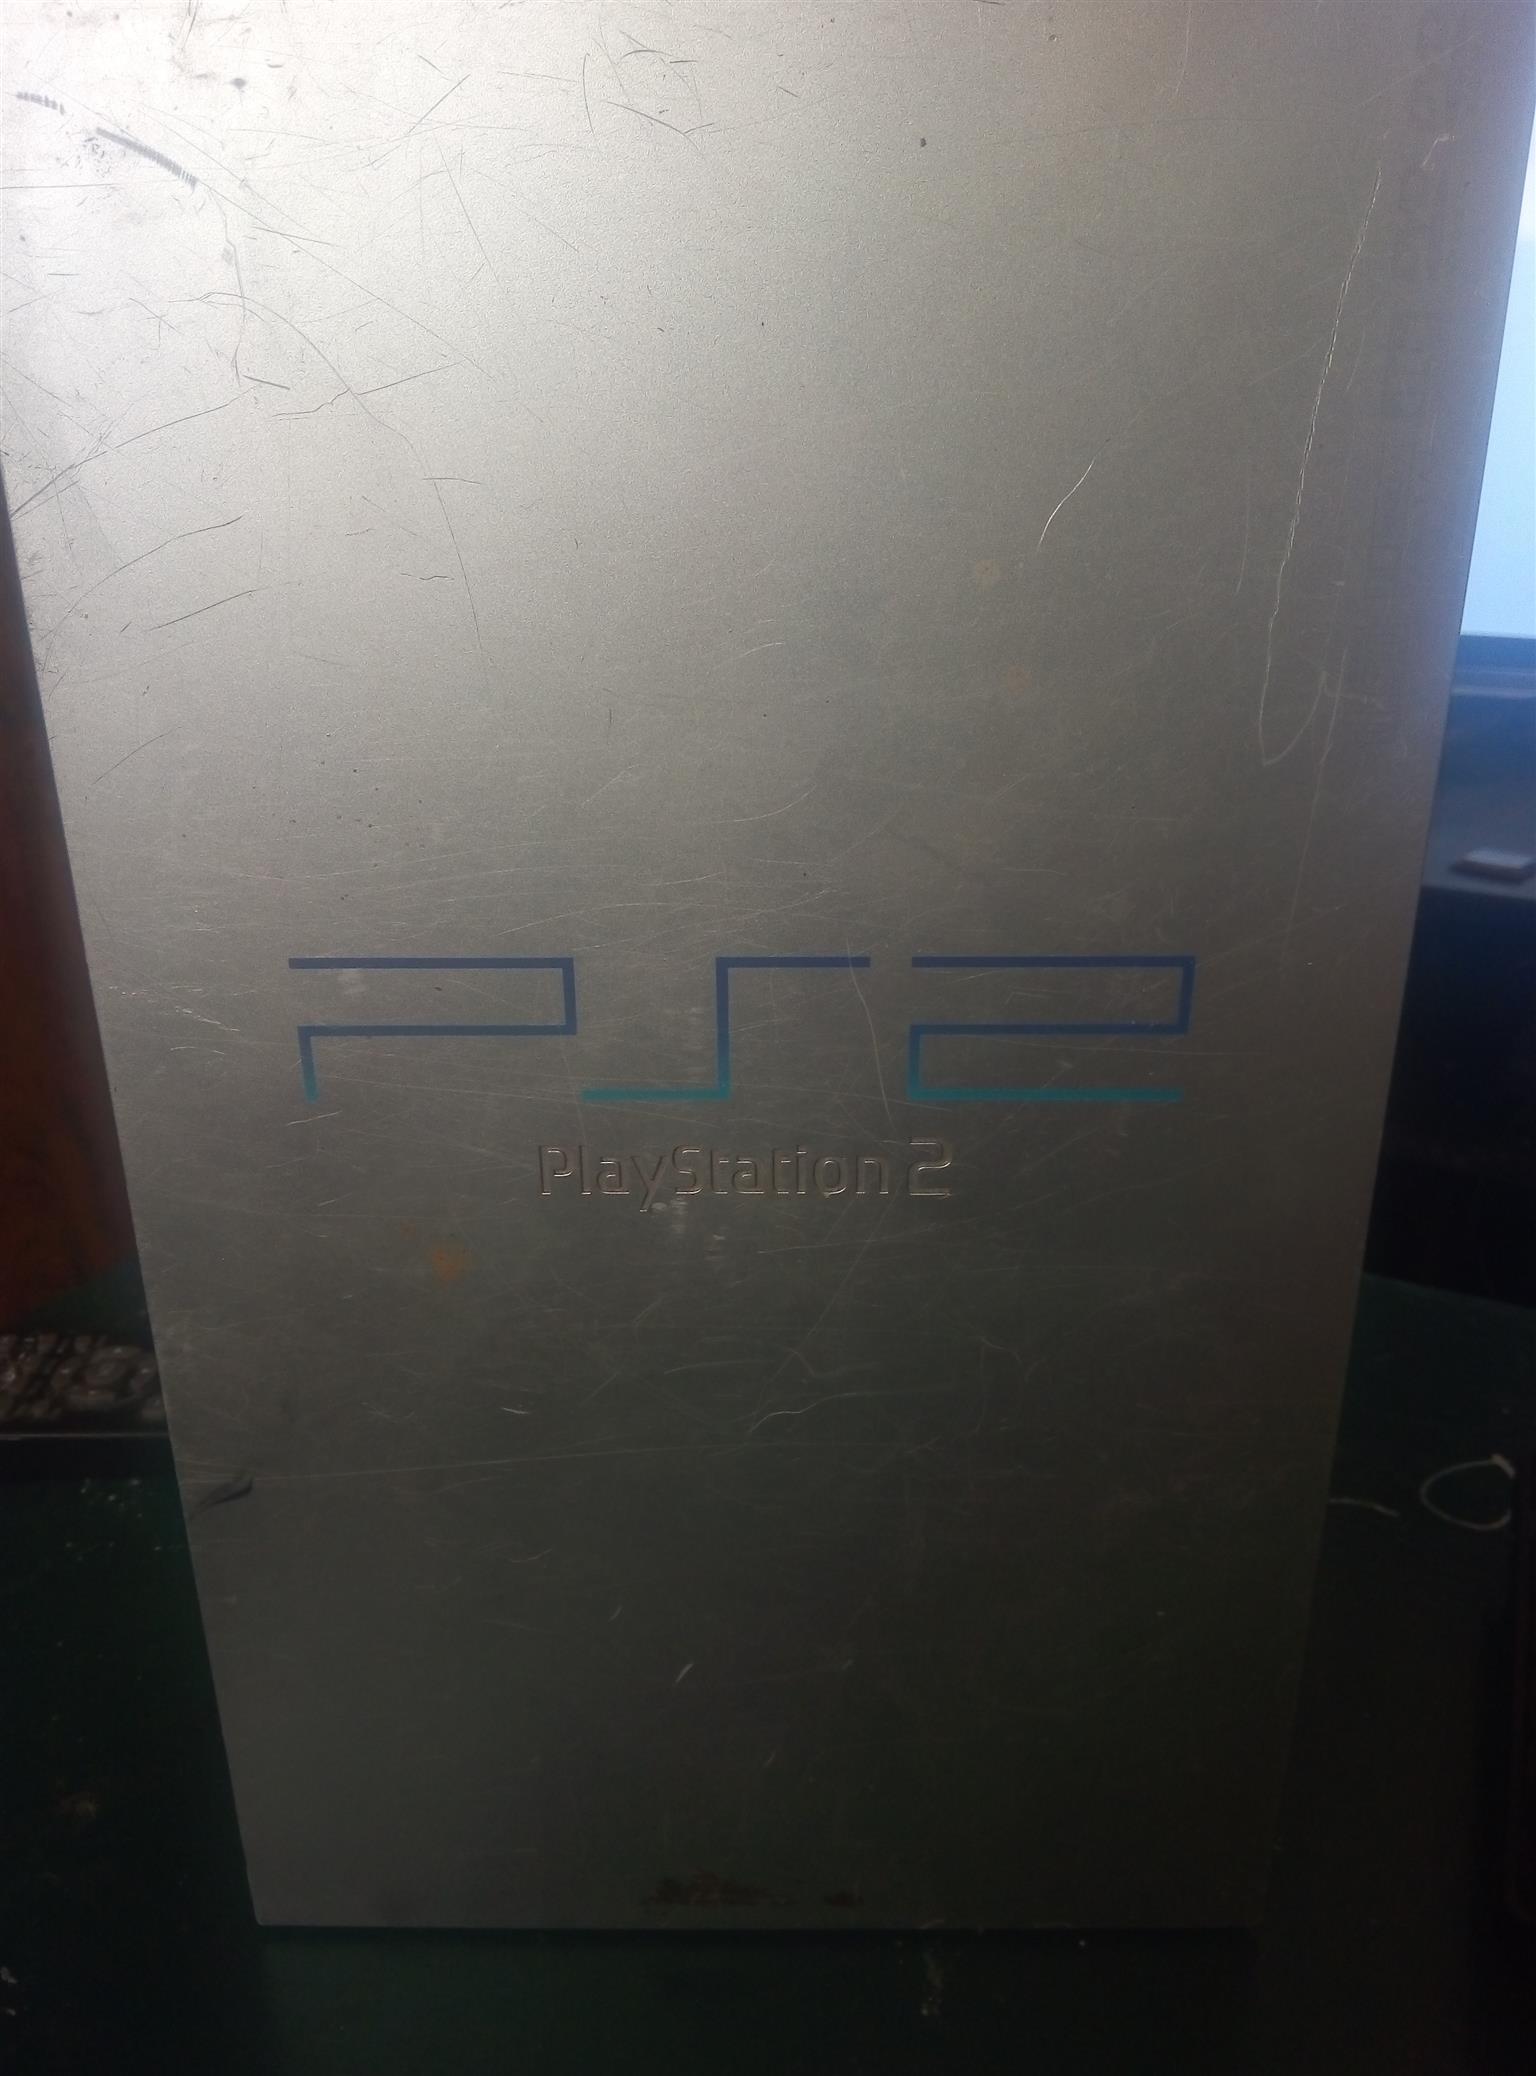 ps2 limited edition